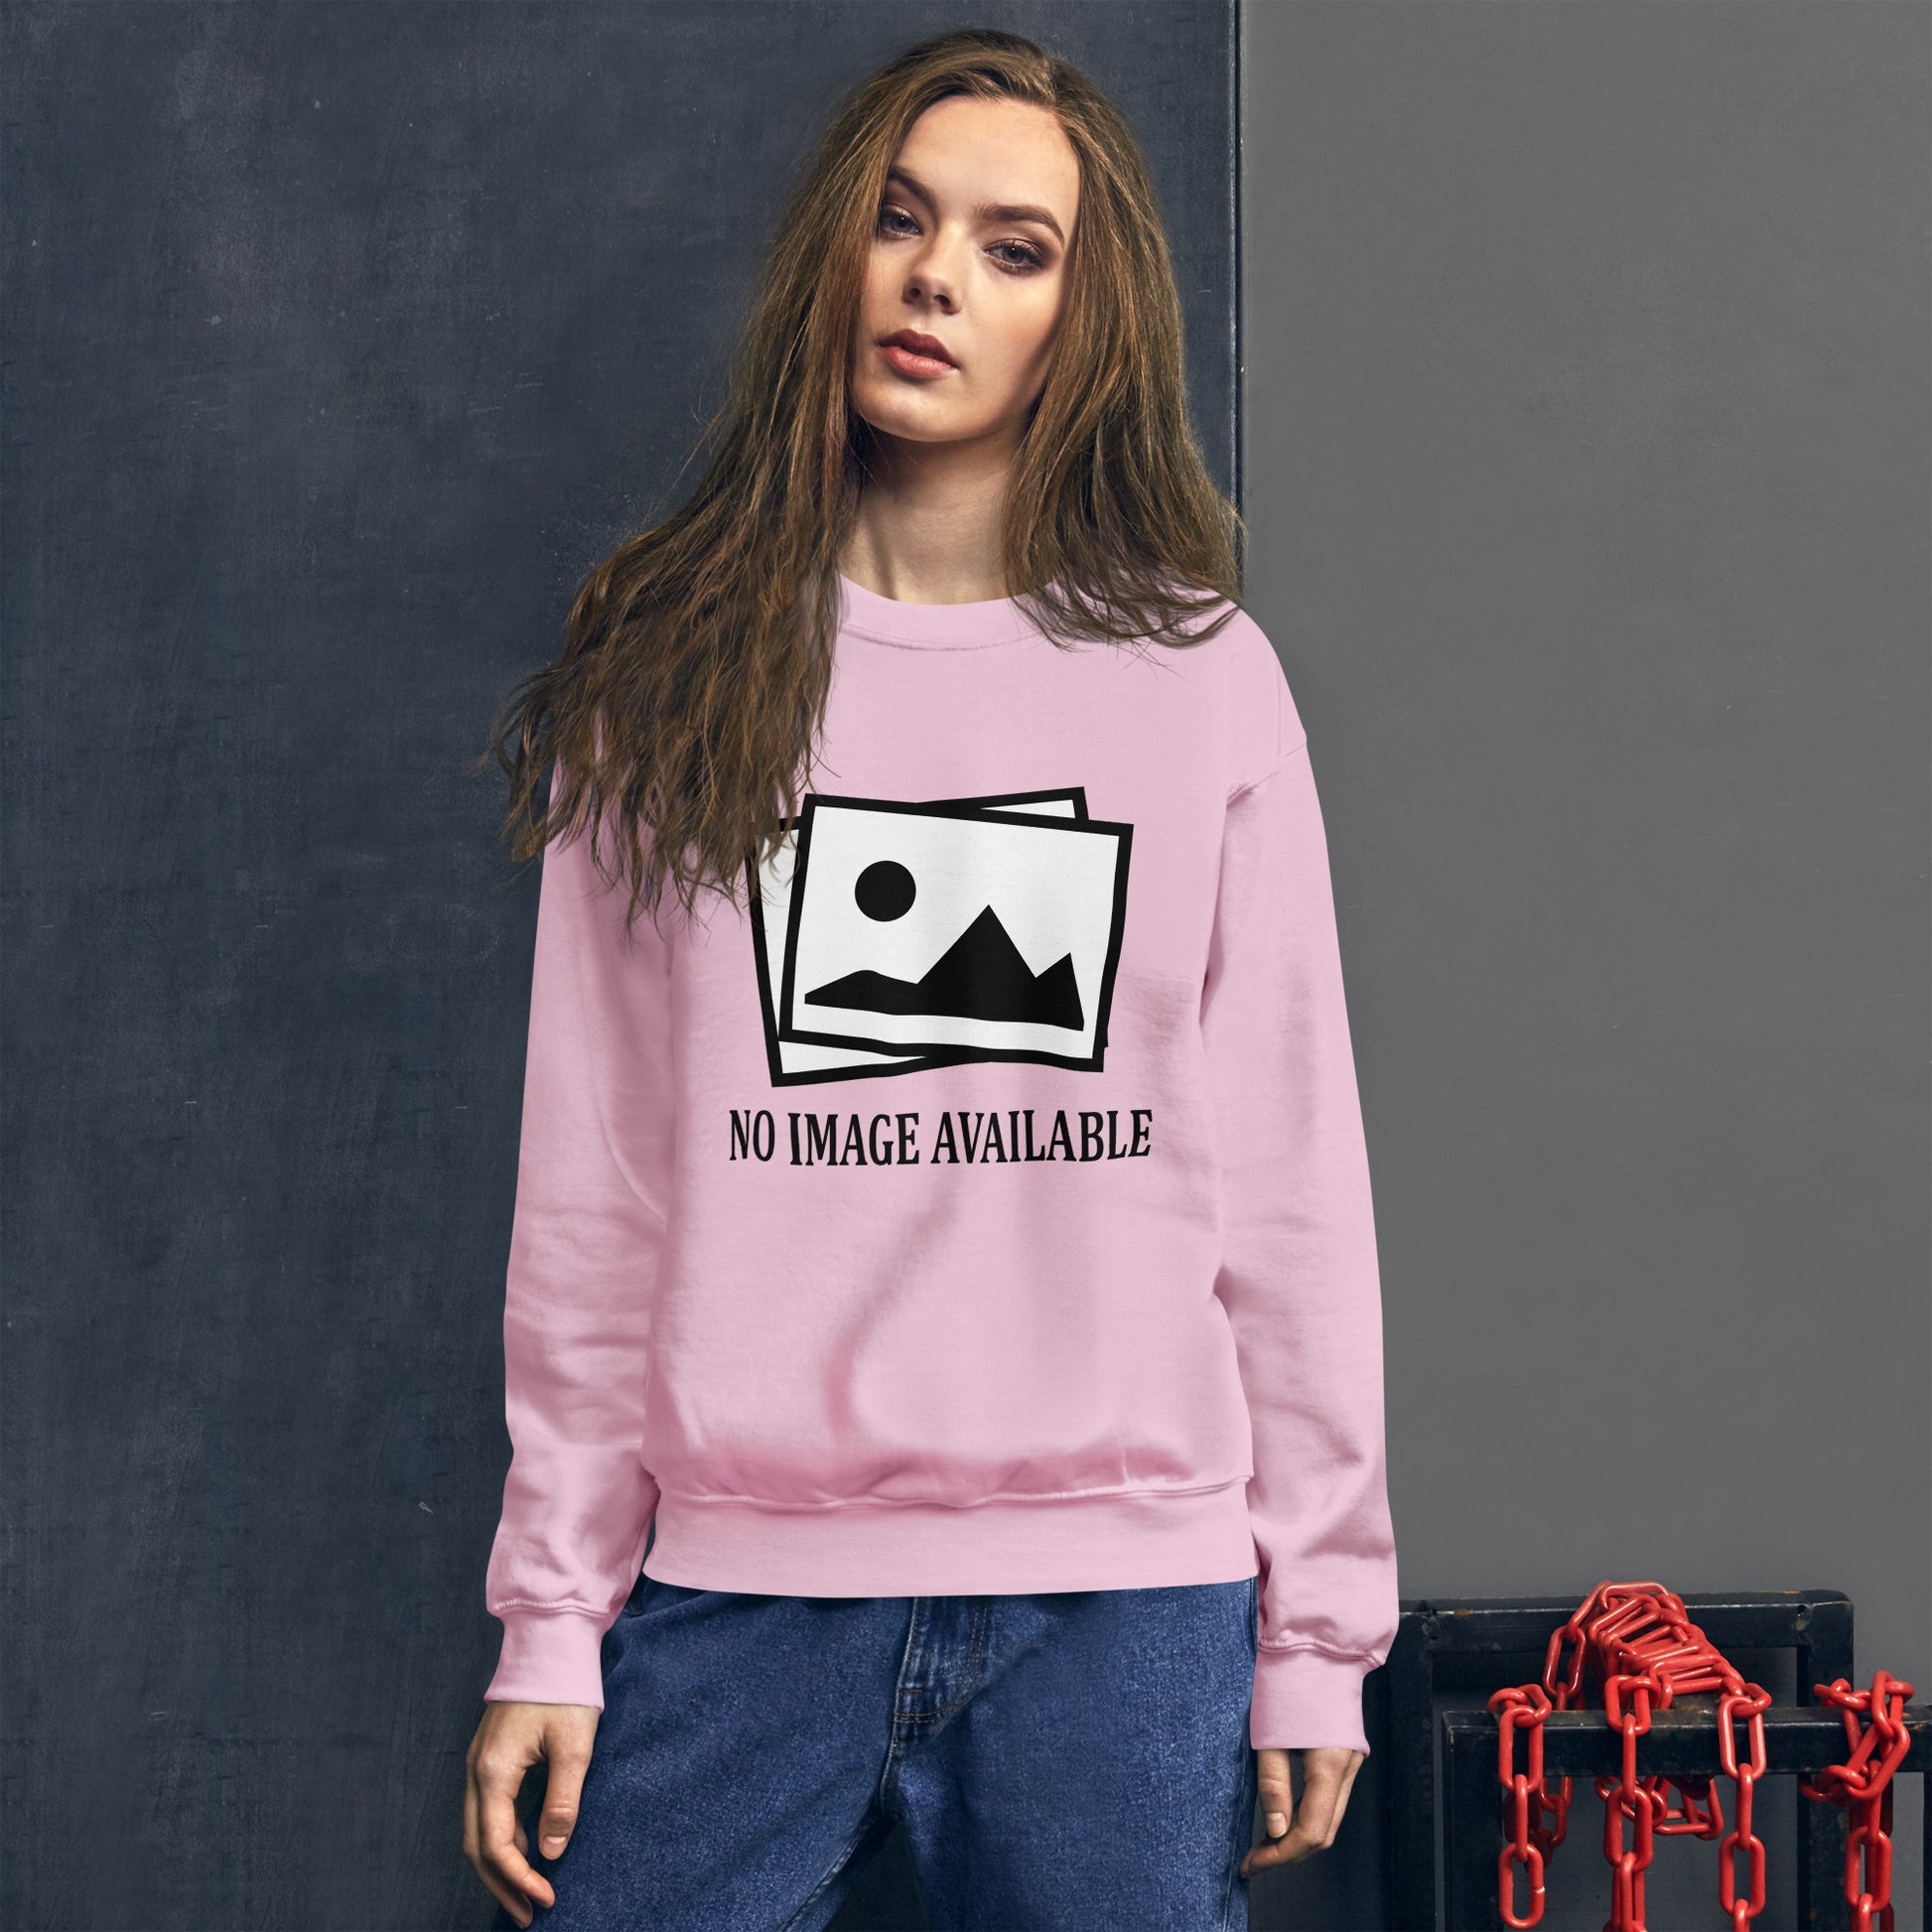 Women with pink sweatshirt with image and text "no image available"